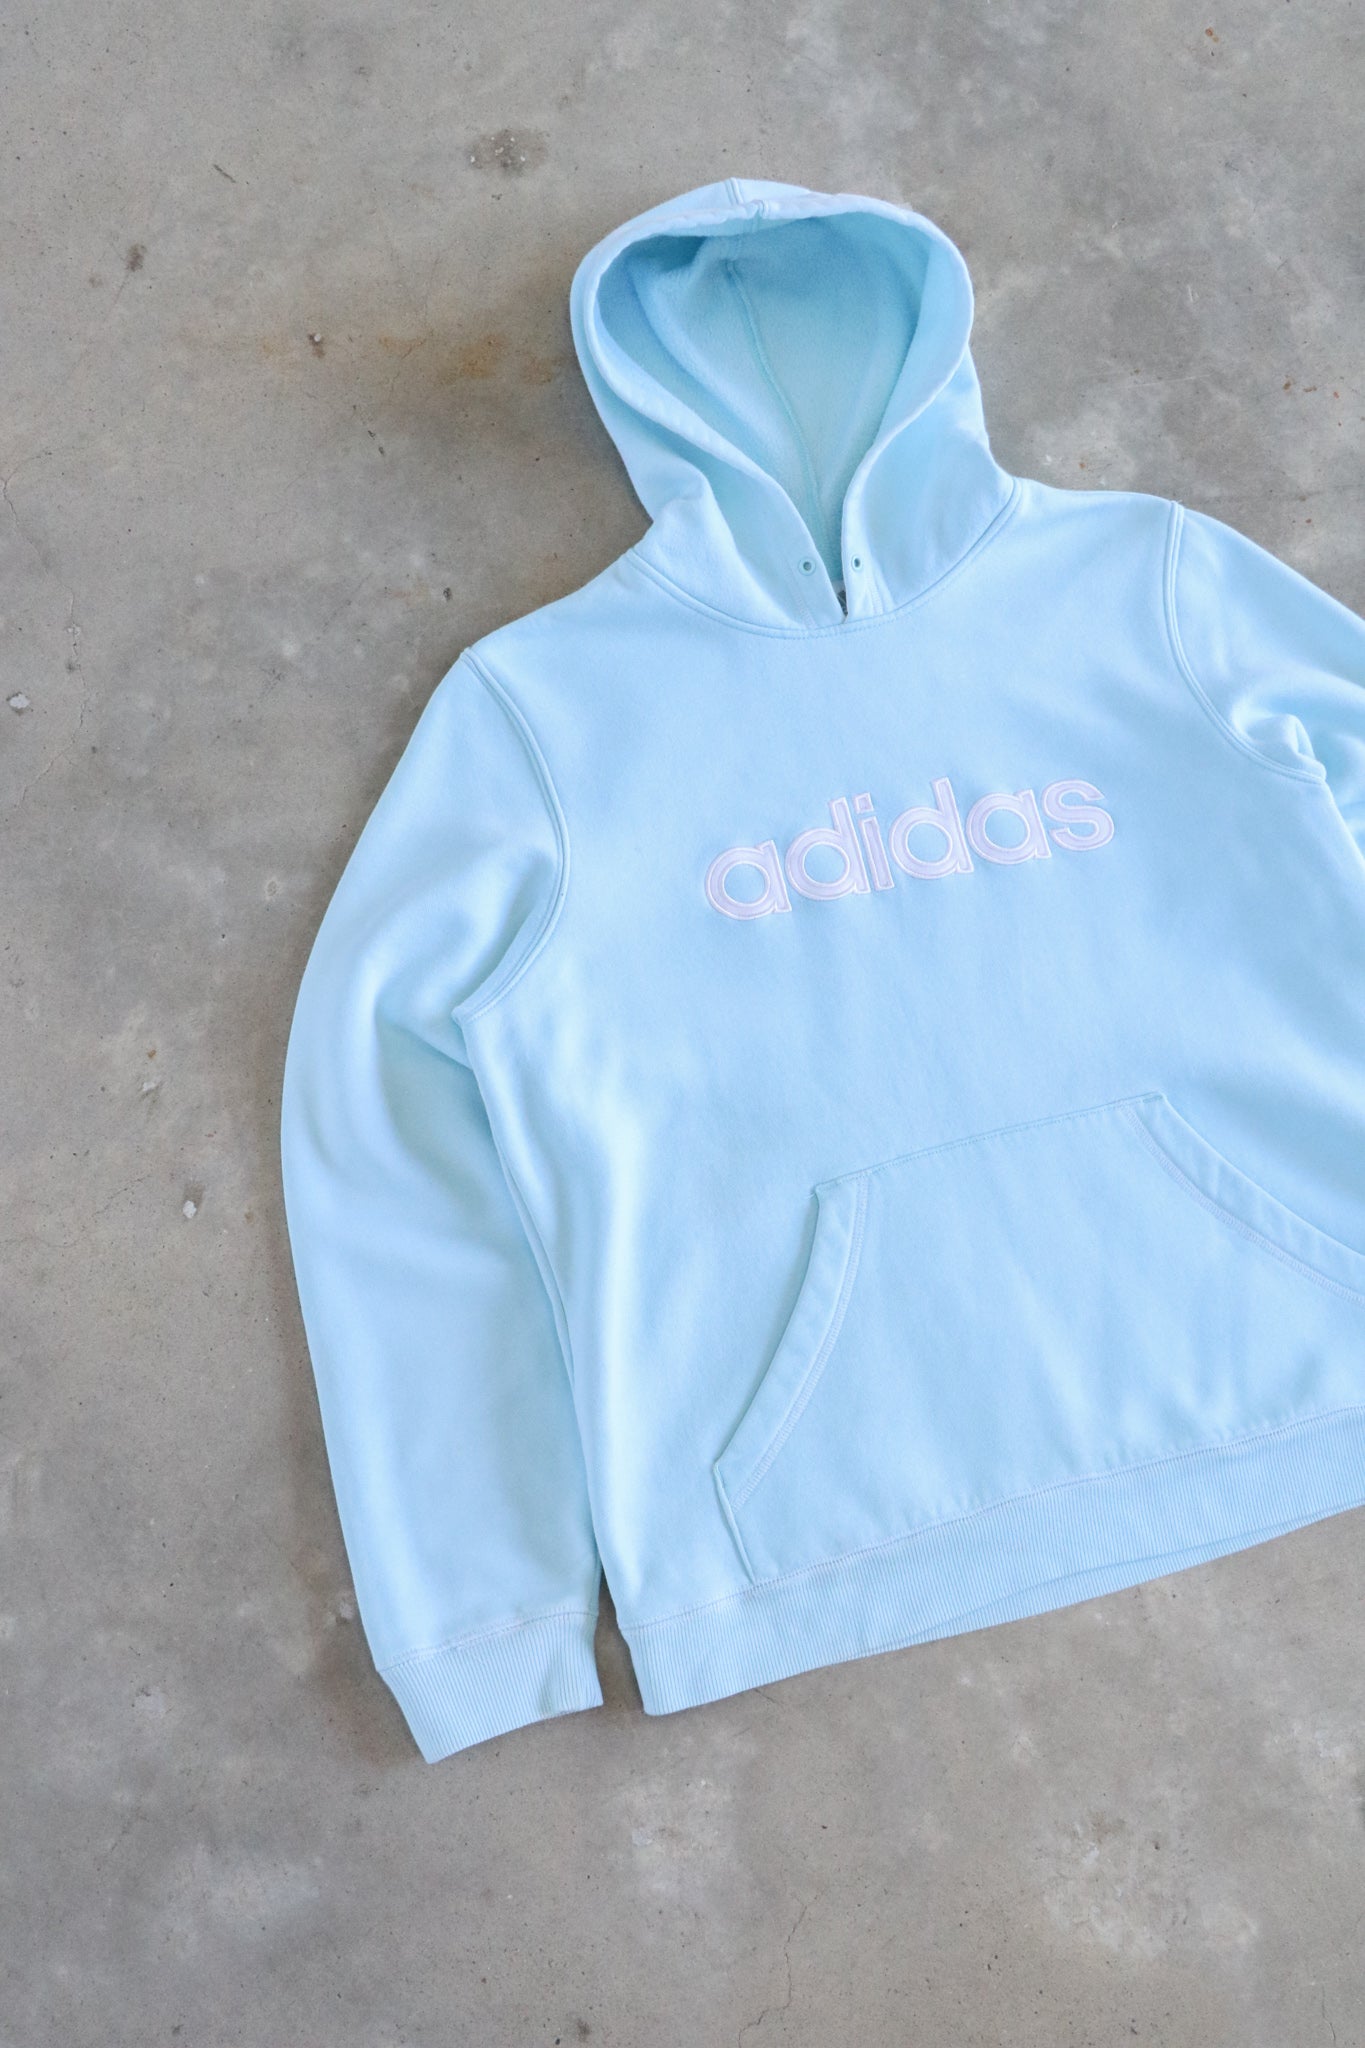 Vintage Adidas Spell Out Hoodie Small